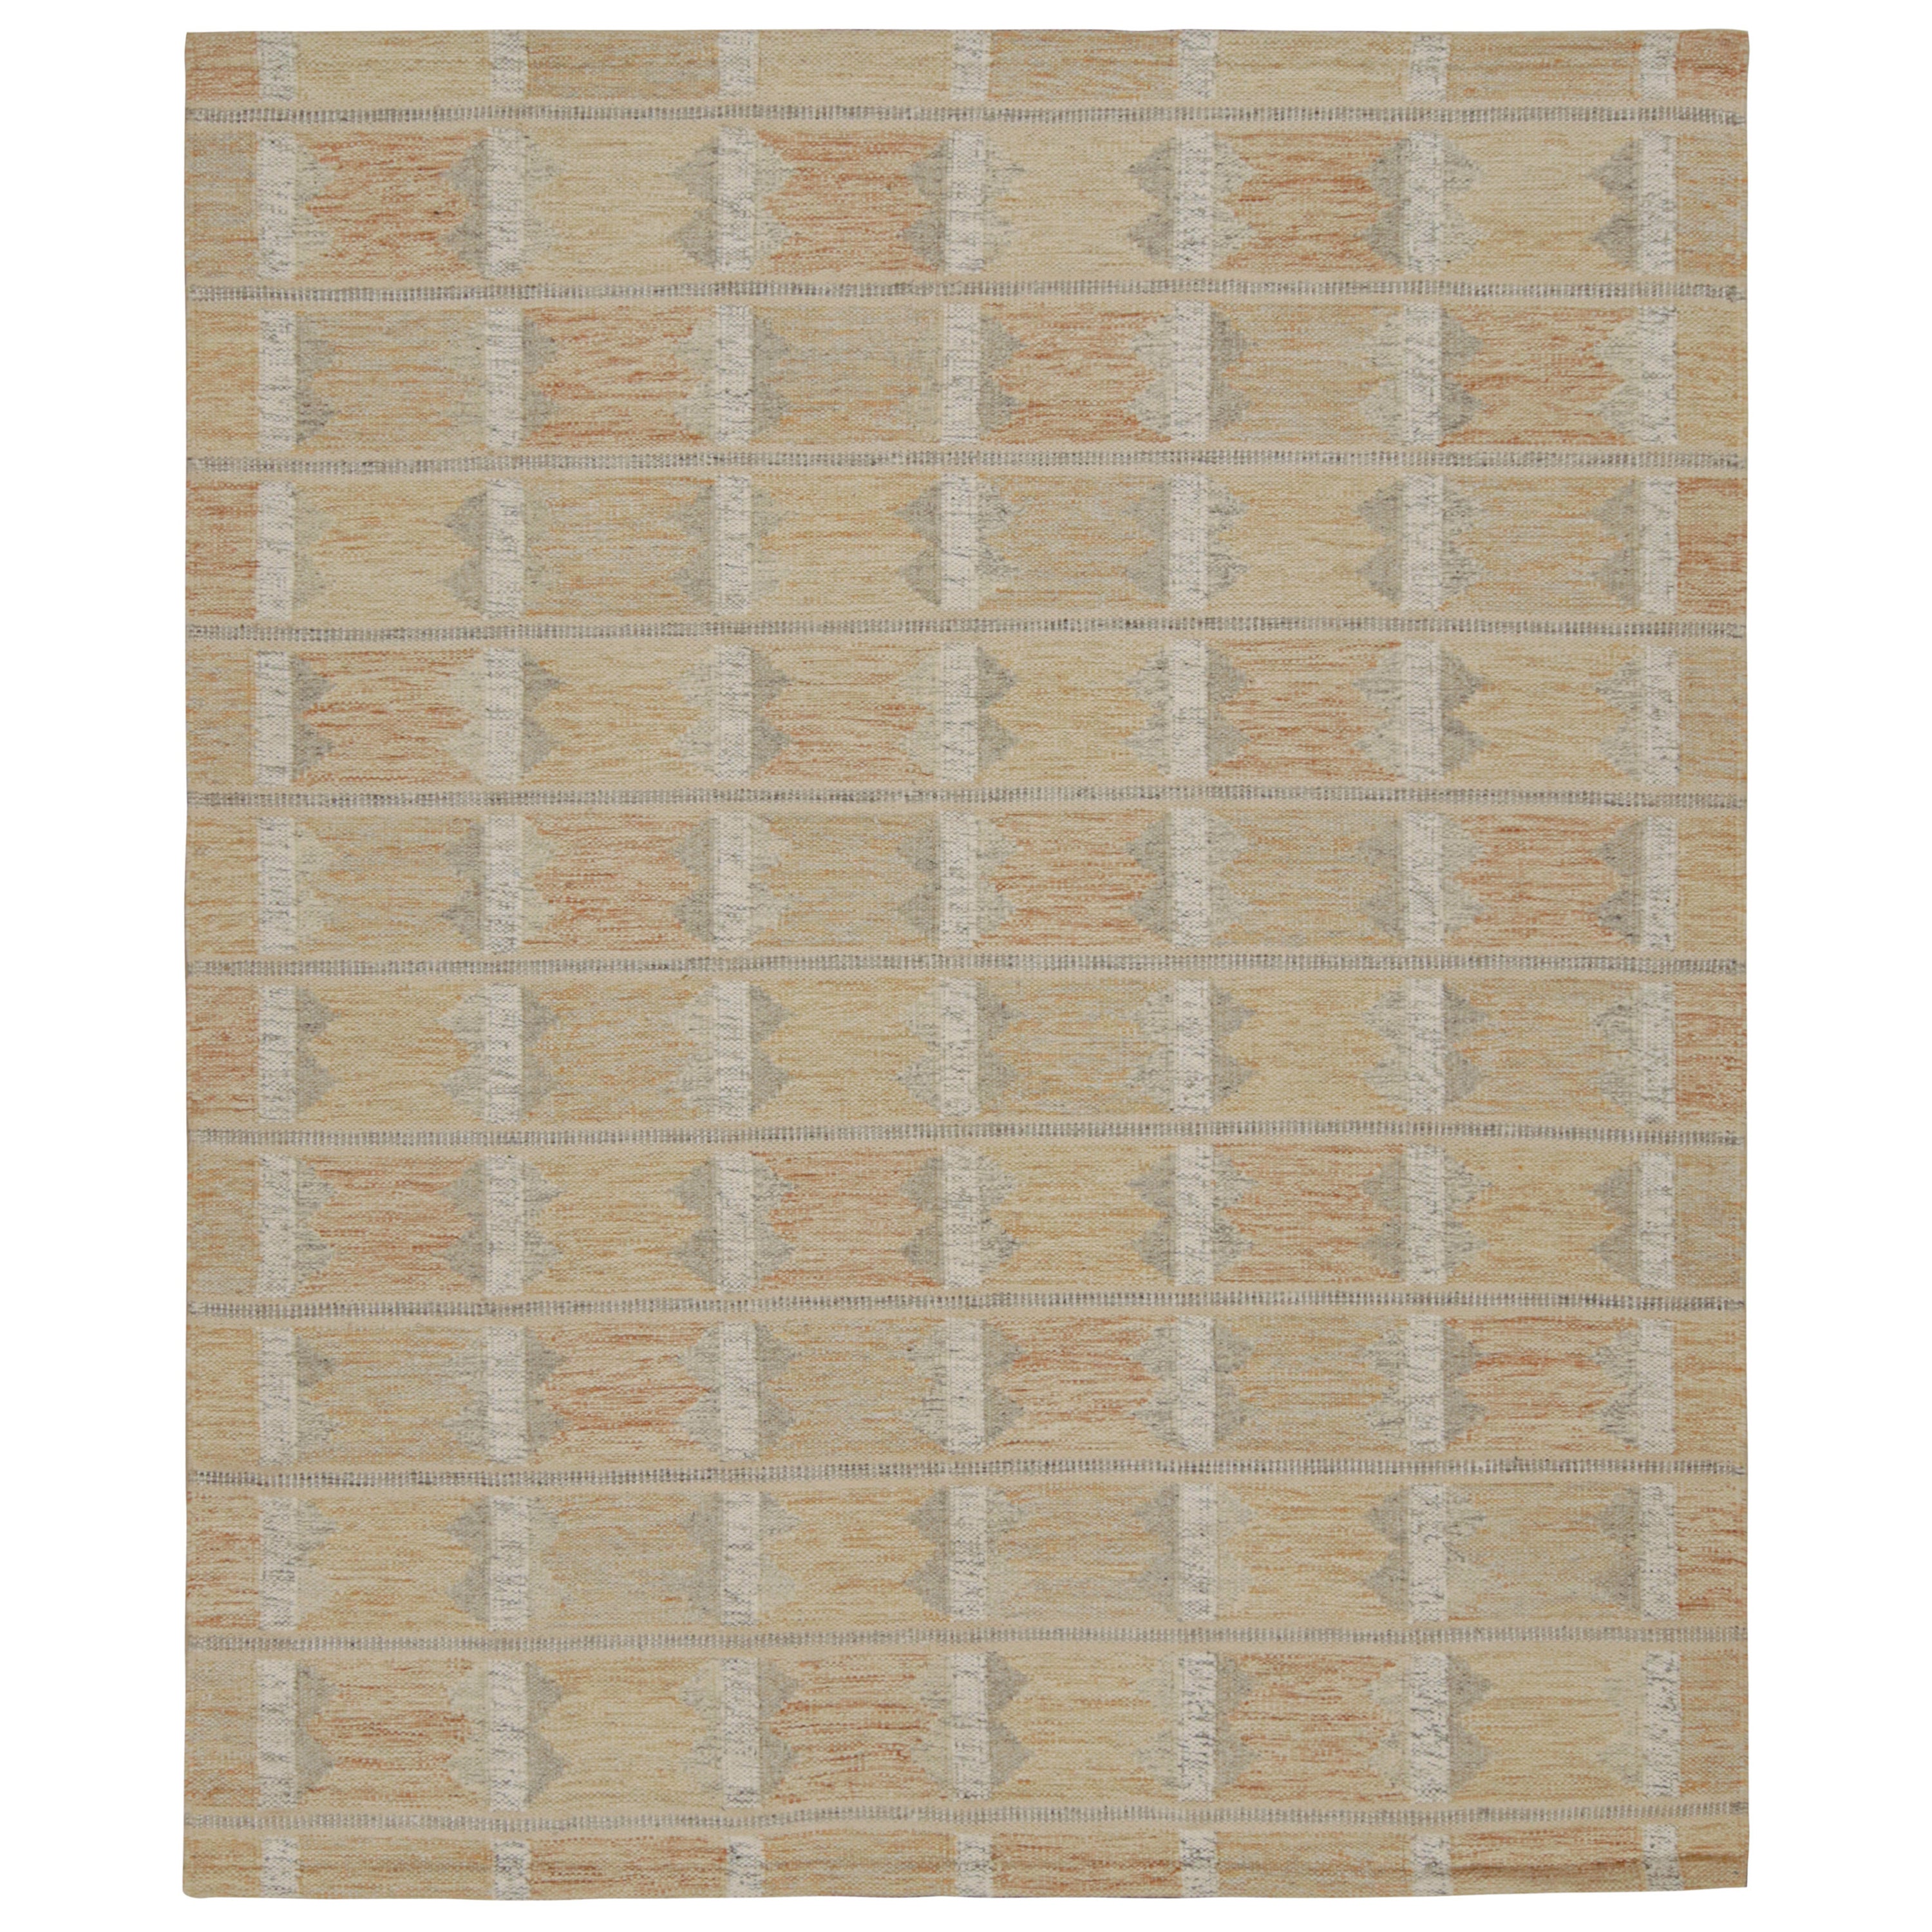 Rug & Kilim’s Scandinavian Style Kilim Rug in Beige with Geometric Patterns For Sale